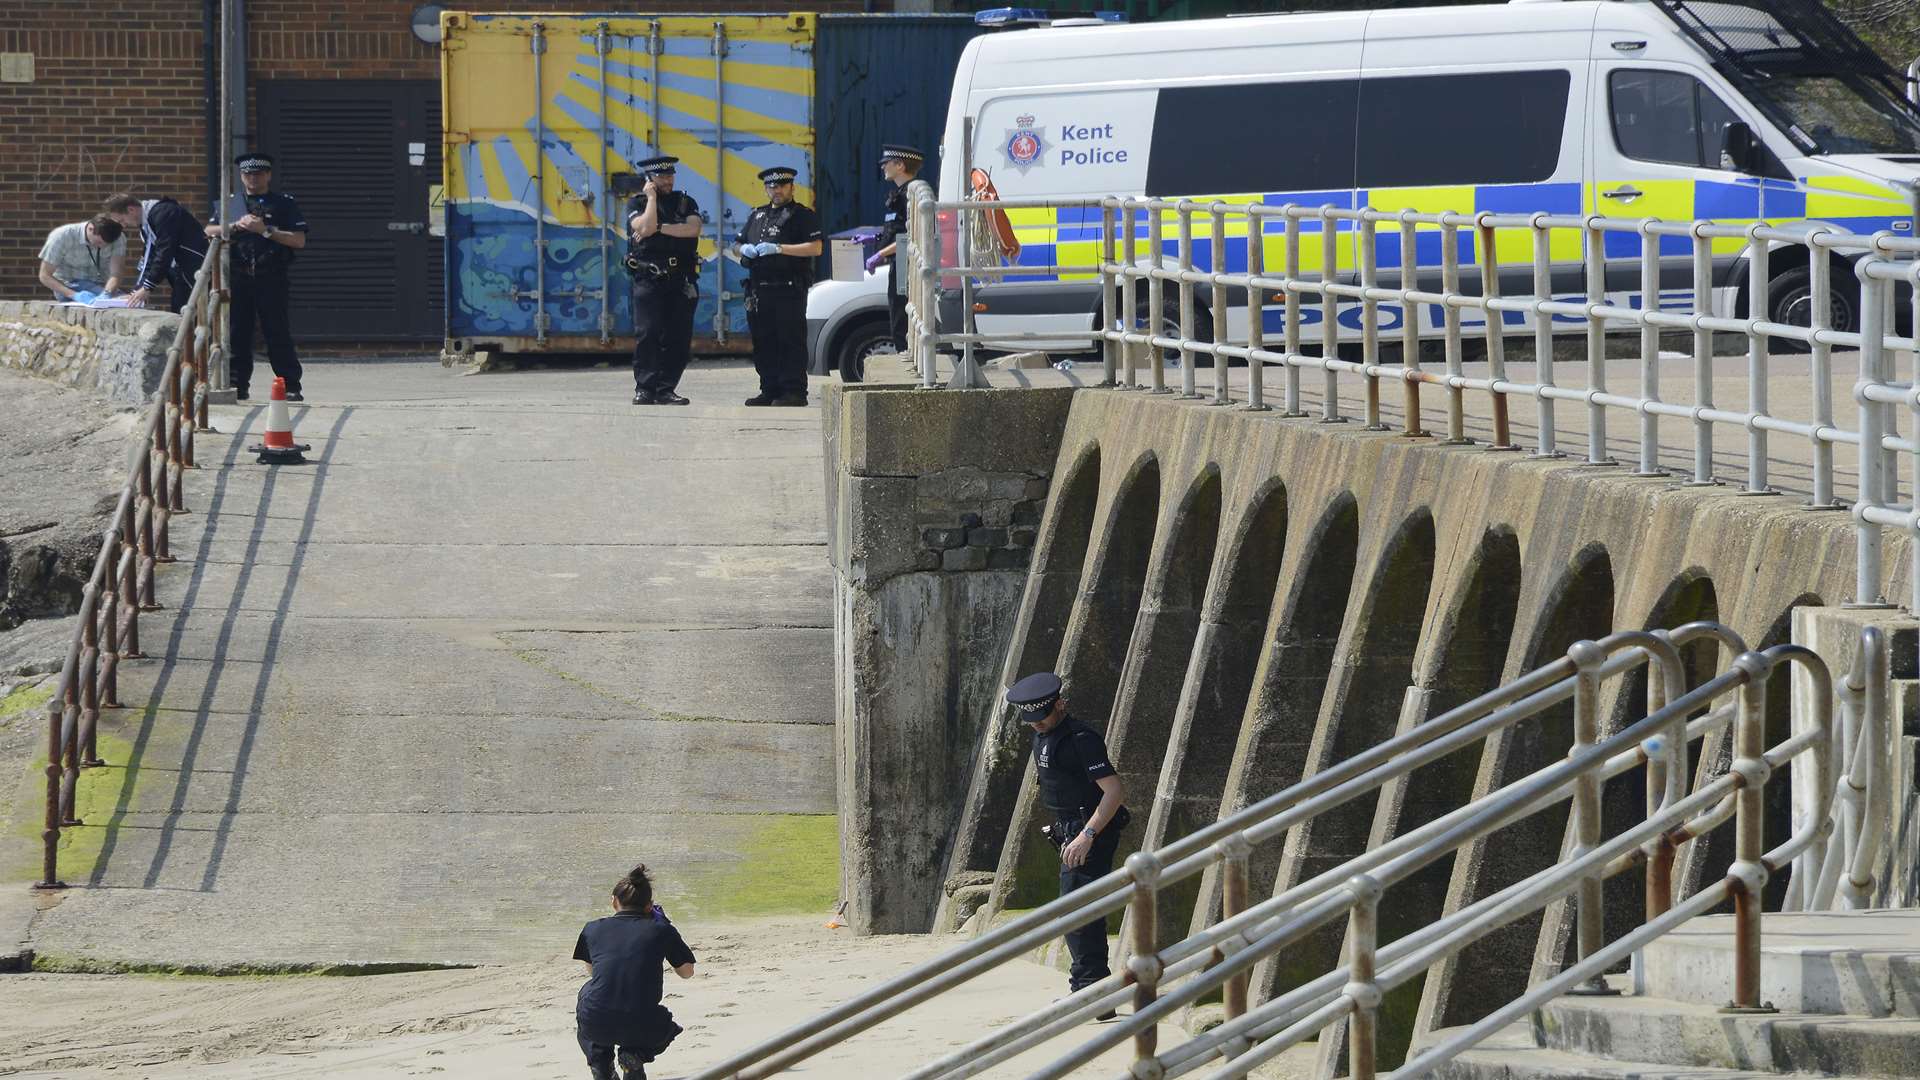 Police at Sunny Sands beach, Folkestone, after the body was found last week.